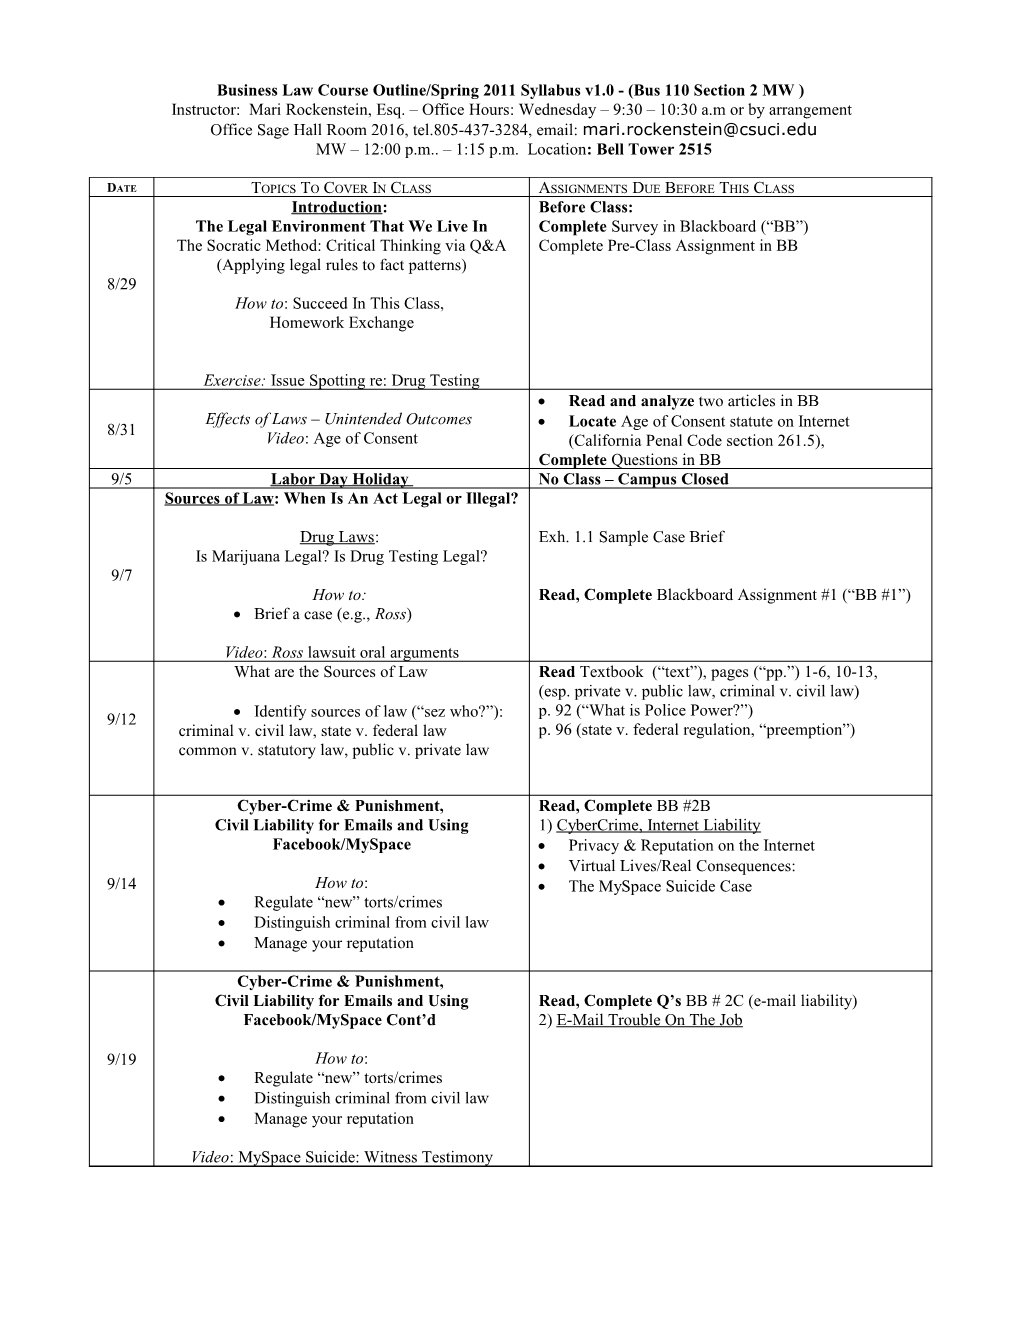 Business Law Course Outline, Fall 2008 (Bus 110 Sections 1 and 2) Syllabus Version 1